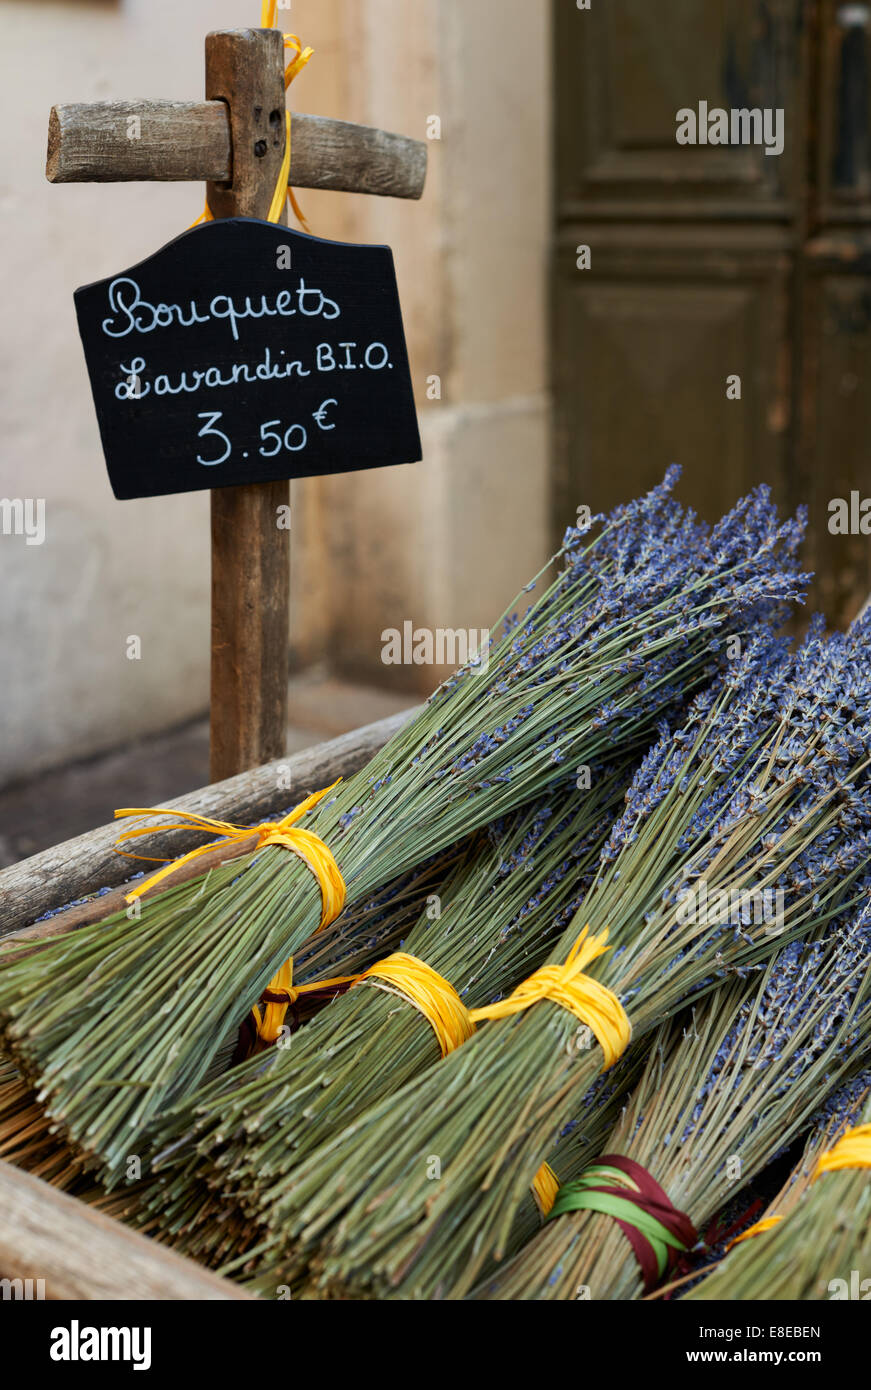 Bouquets of dry lavender for sale in Aix en Provence town, France Stock Photo